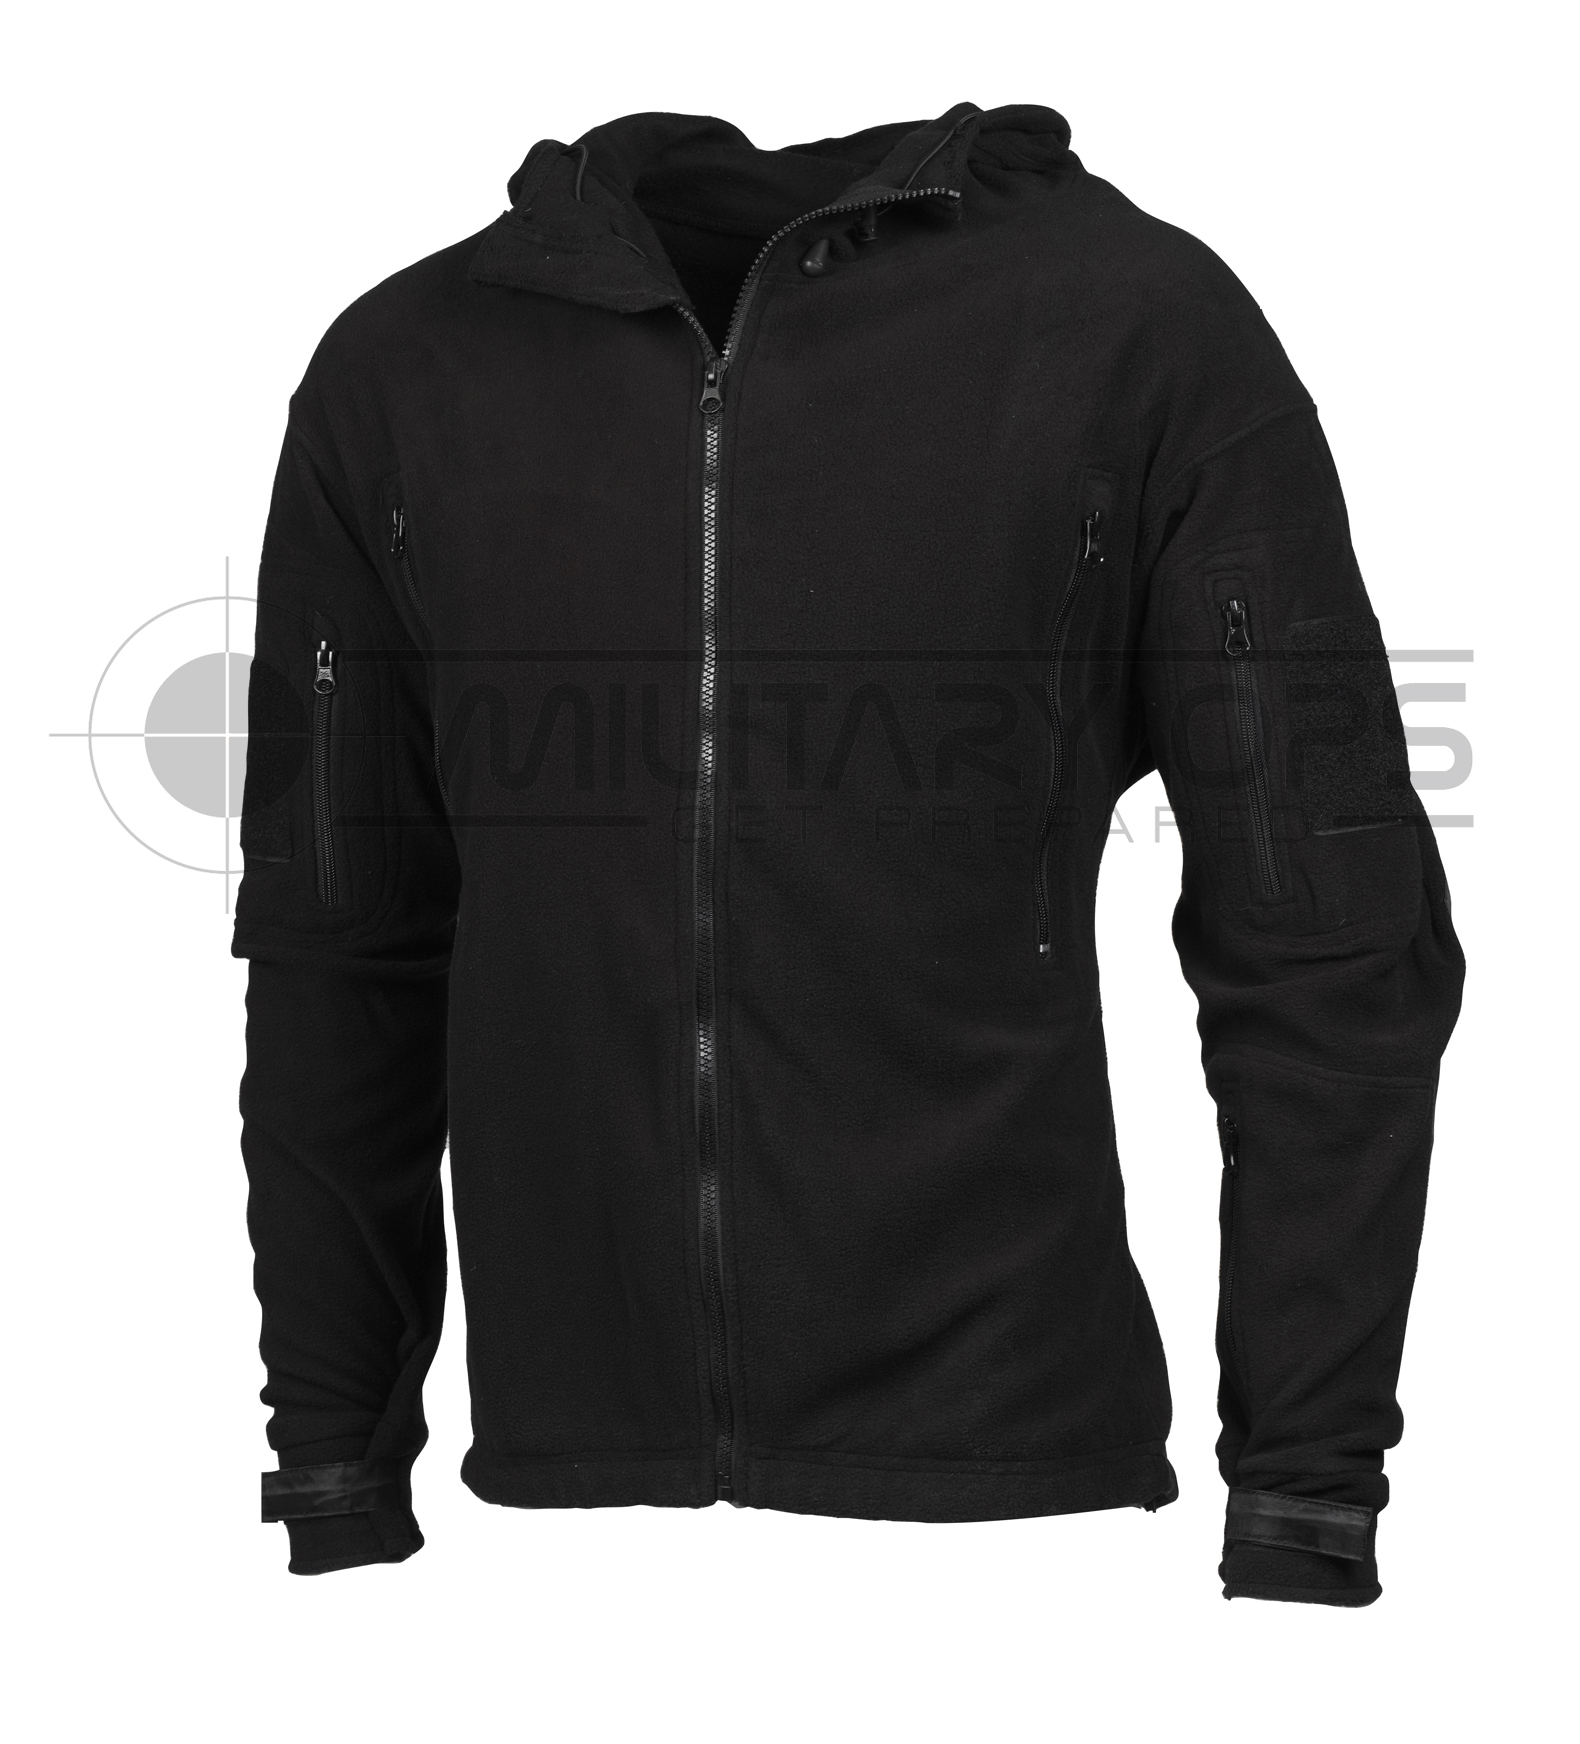 TACTICAL FLEECE HOODIE MILITARY SPECIAL FORCES JACKET POLICE SECURITY ...